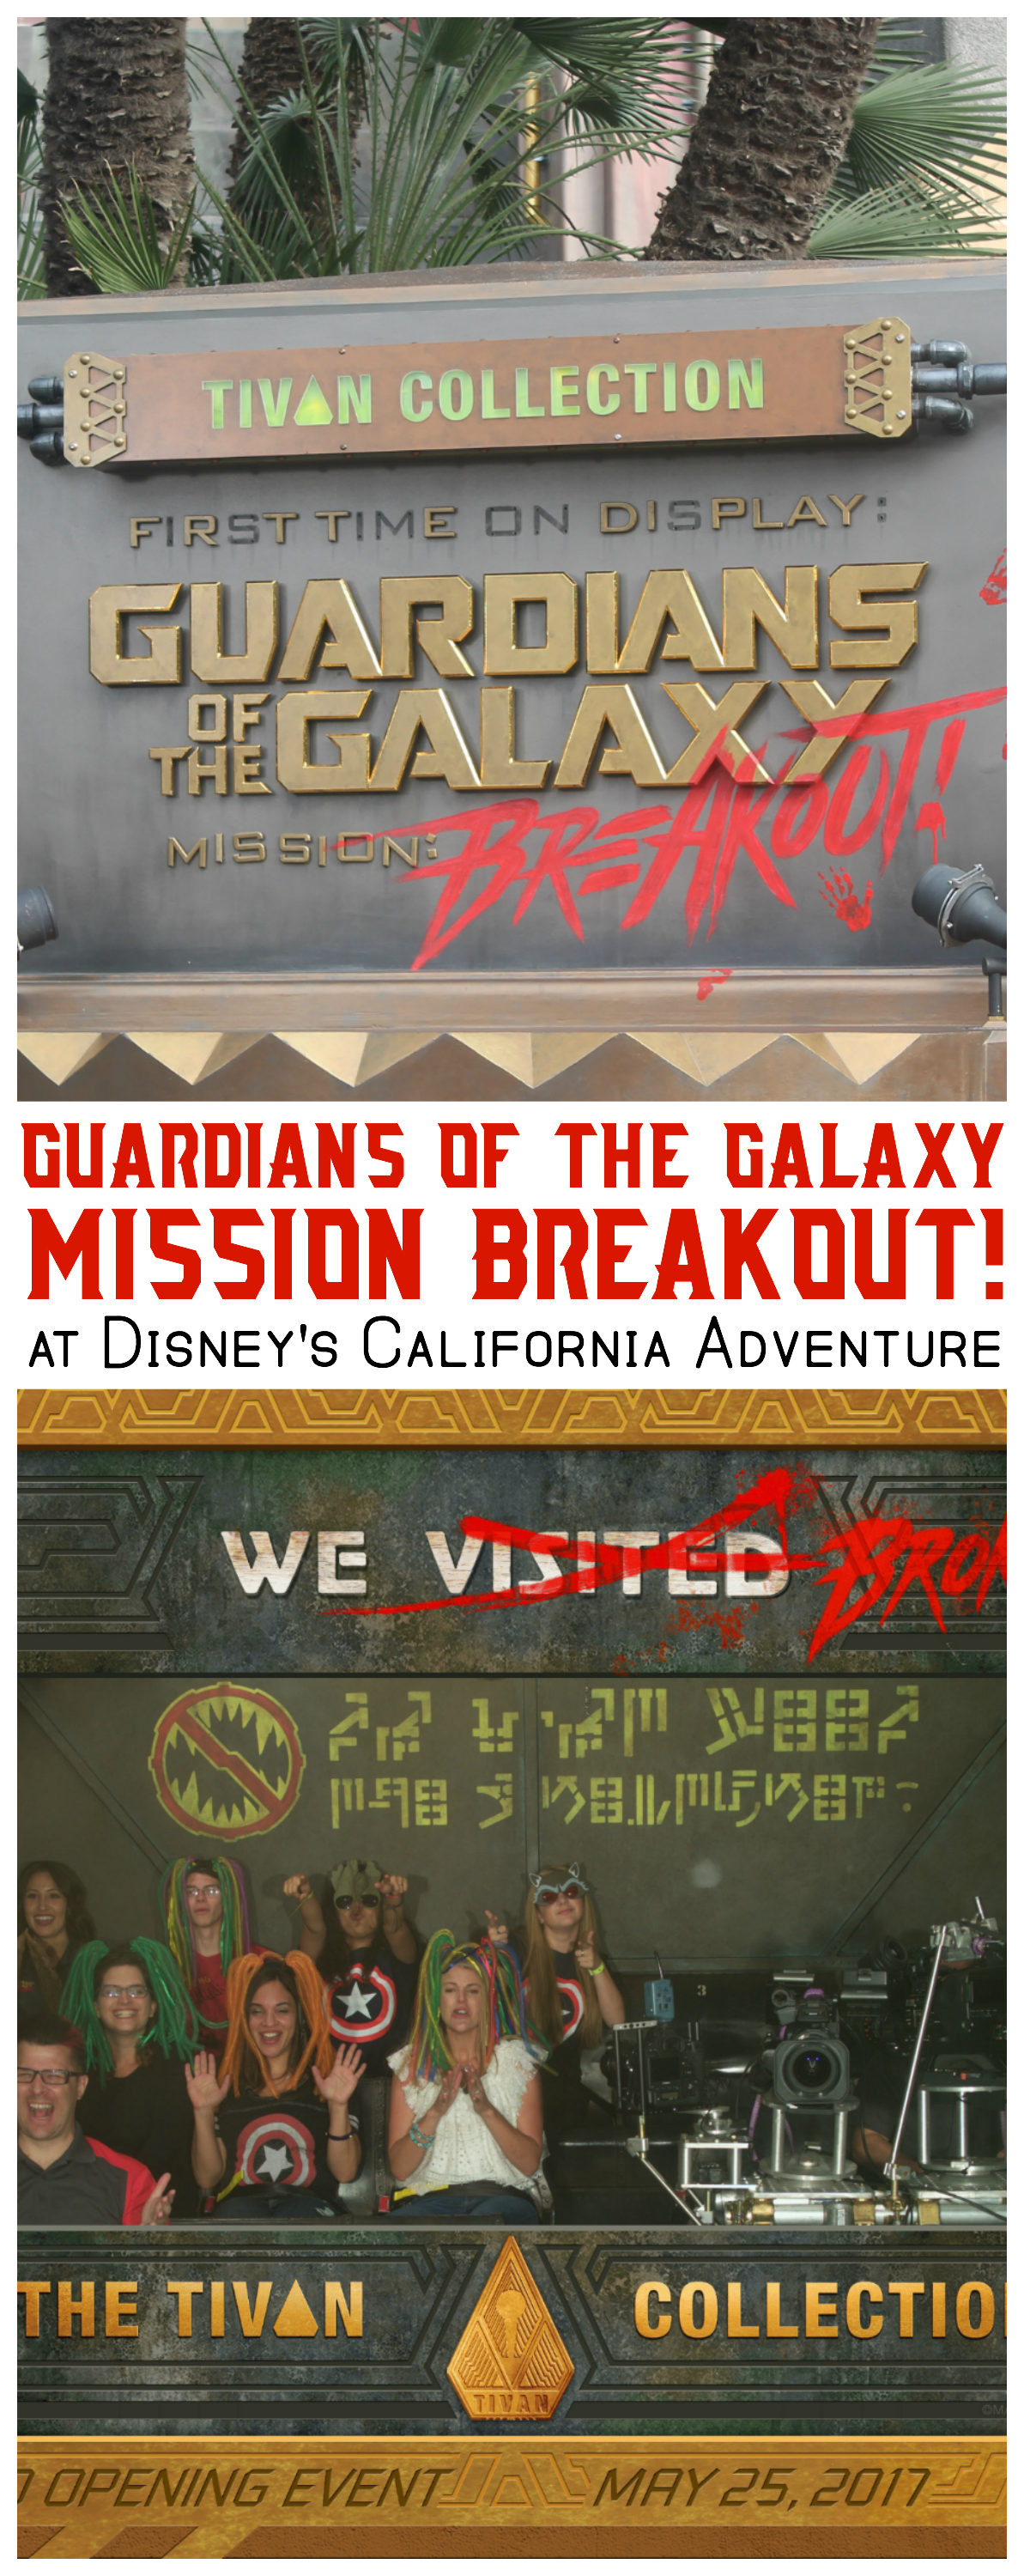 Join Rocket as he attempts to rescue the Guardians of the Galaxy on Disneyland's newest thrill ride: Guardians of the Galaxy - Mission: Breakout!